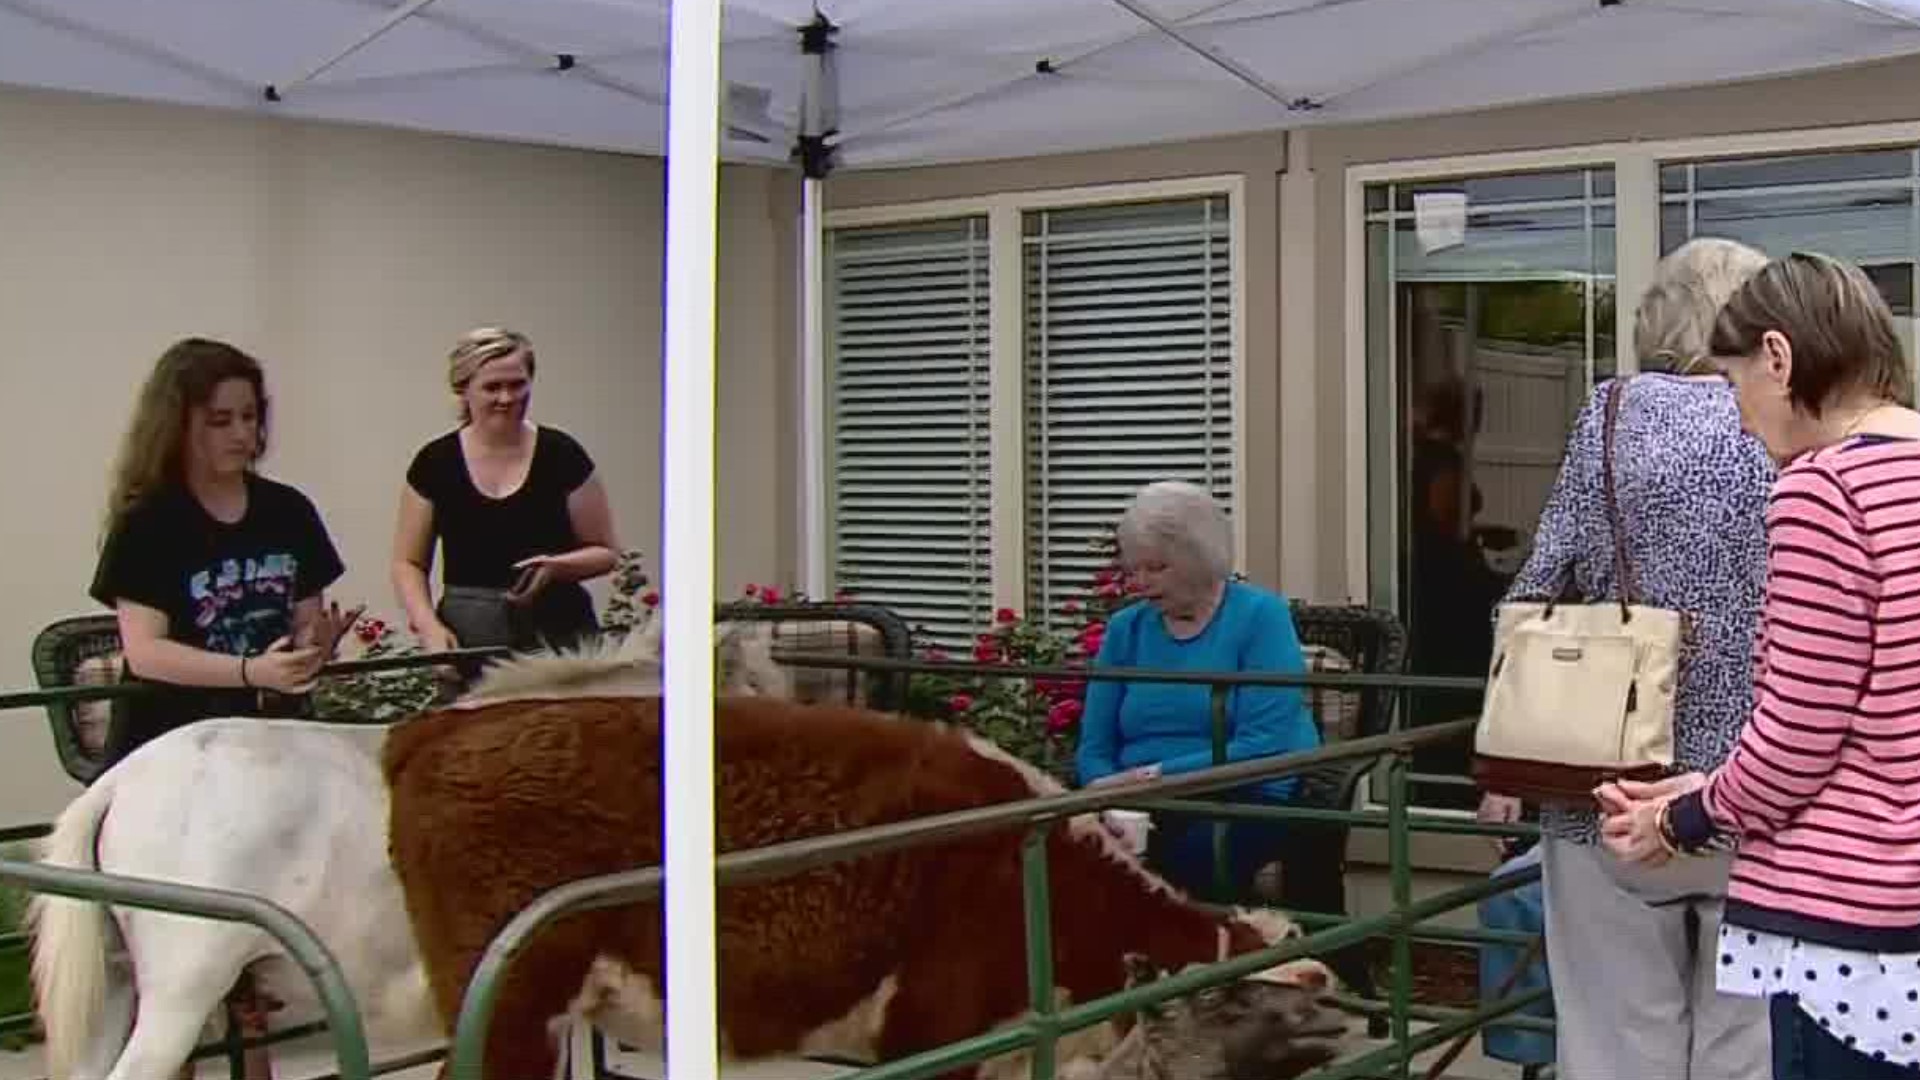 The Magnolia Place Assisted Living and Memory Care in Rogers held a "Farmyard Affair" and brought several barnyard animals for a petting zoo for residents.